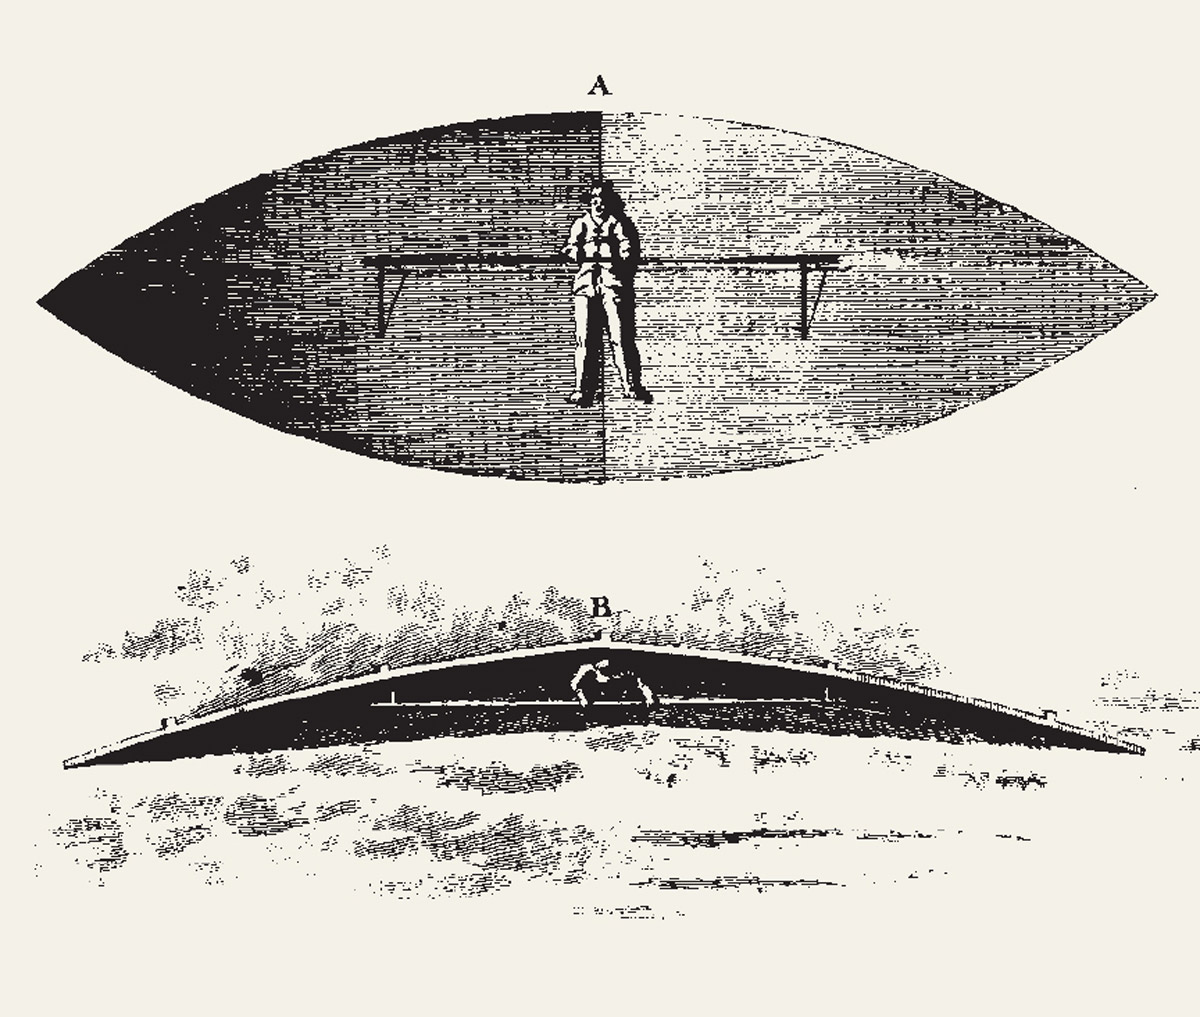 A general impression of Carl Meerwein’s ornithopter (1784) in flight.